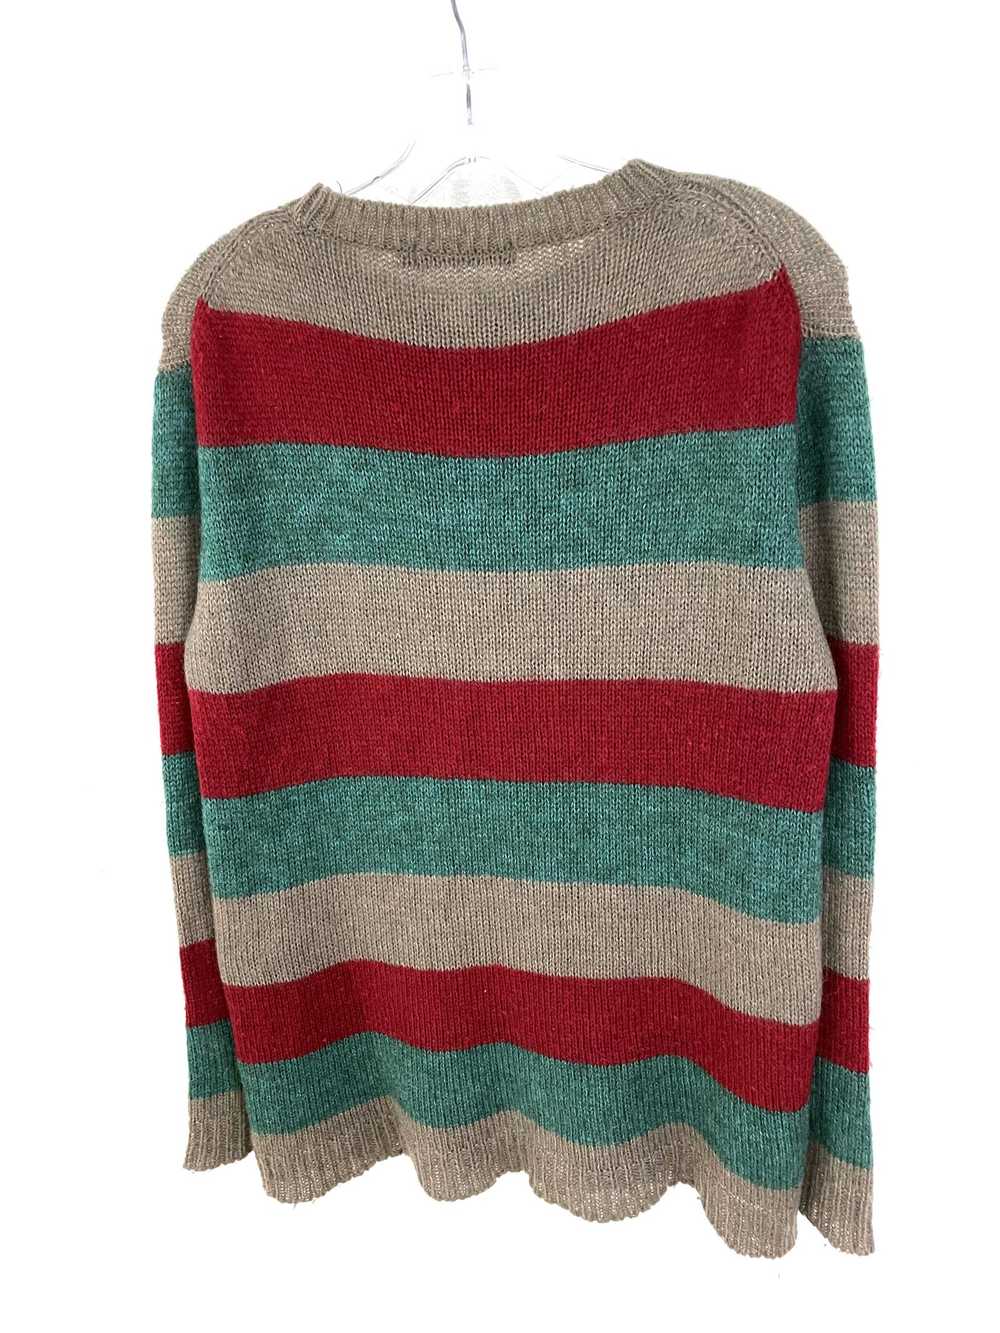 Undercover AW05 Arts & Crafts Mohair Sweater - image 7